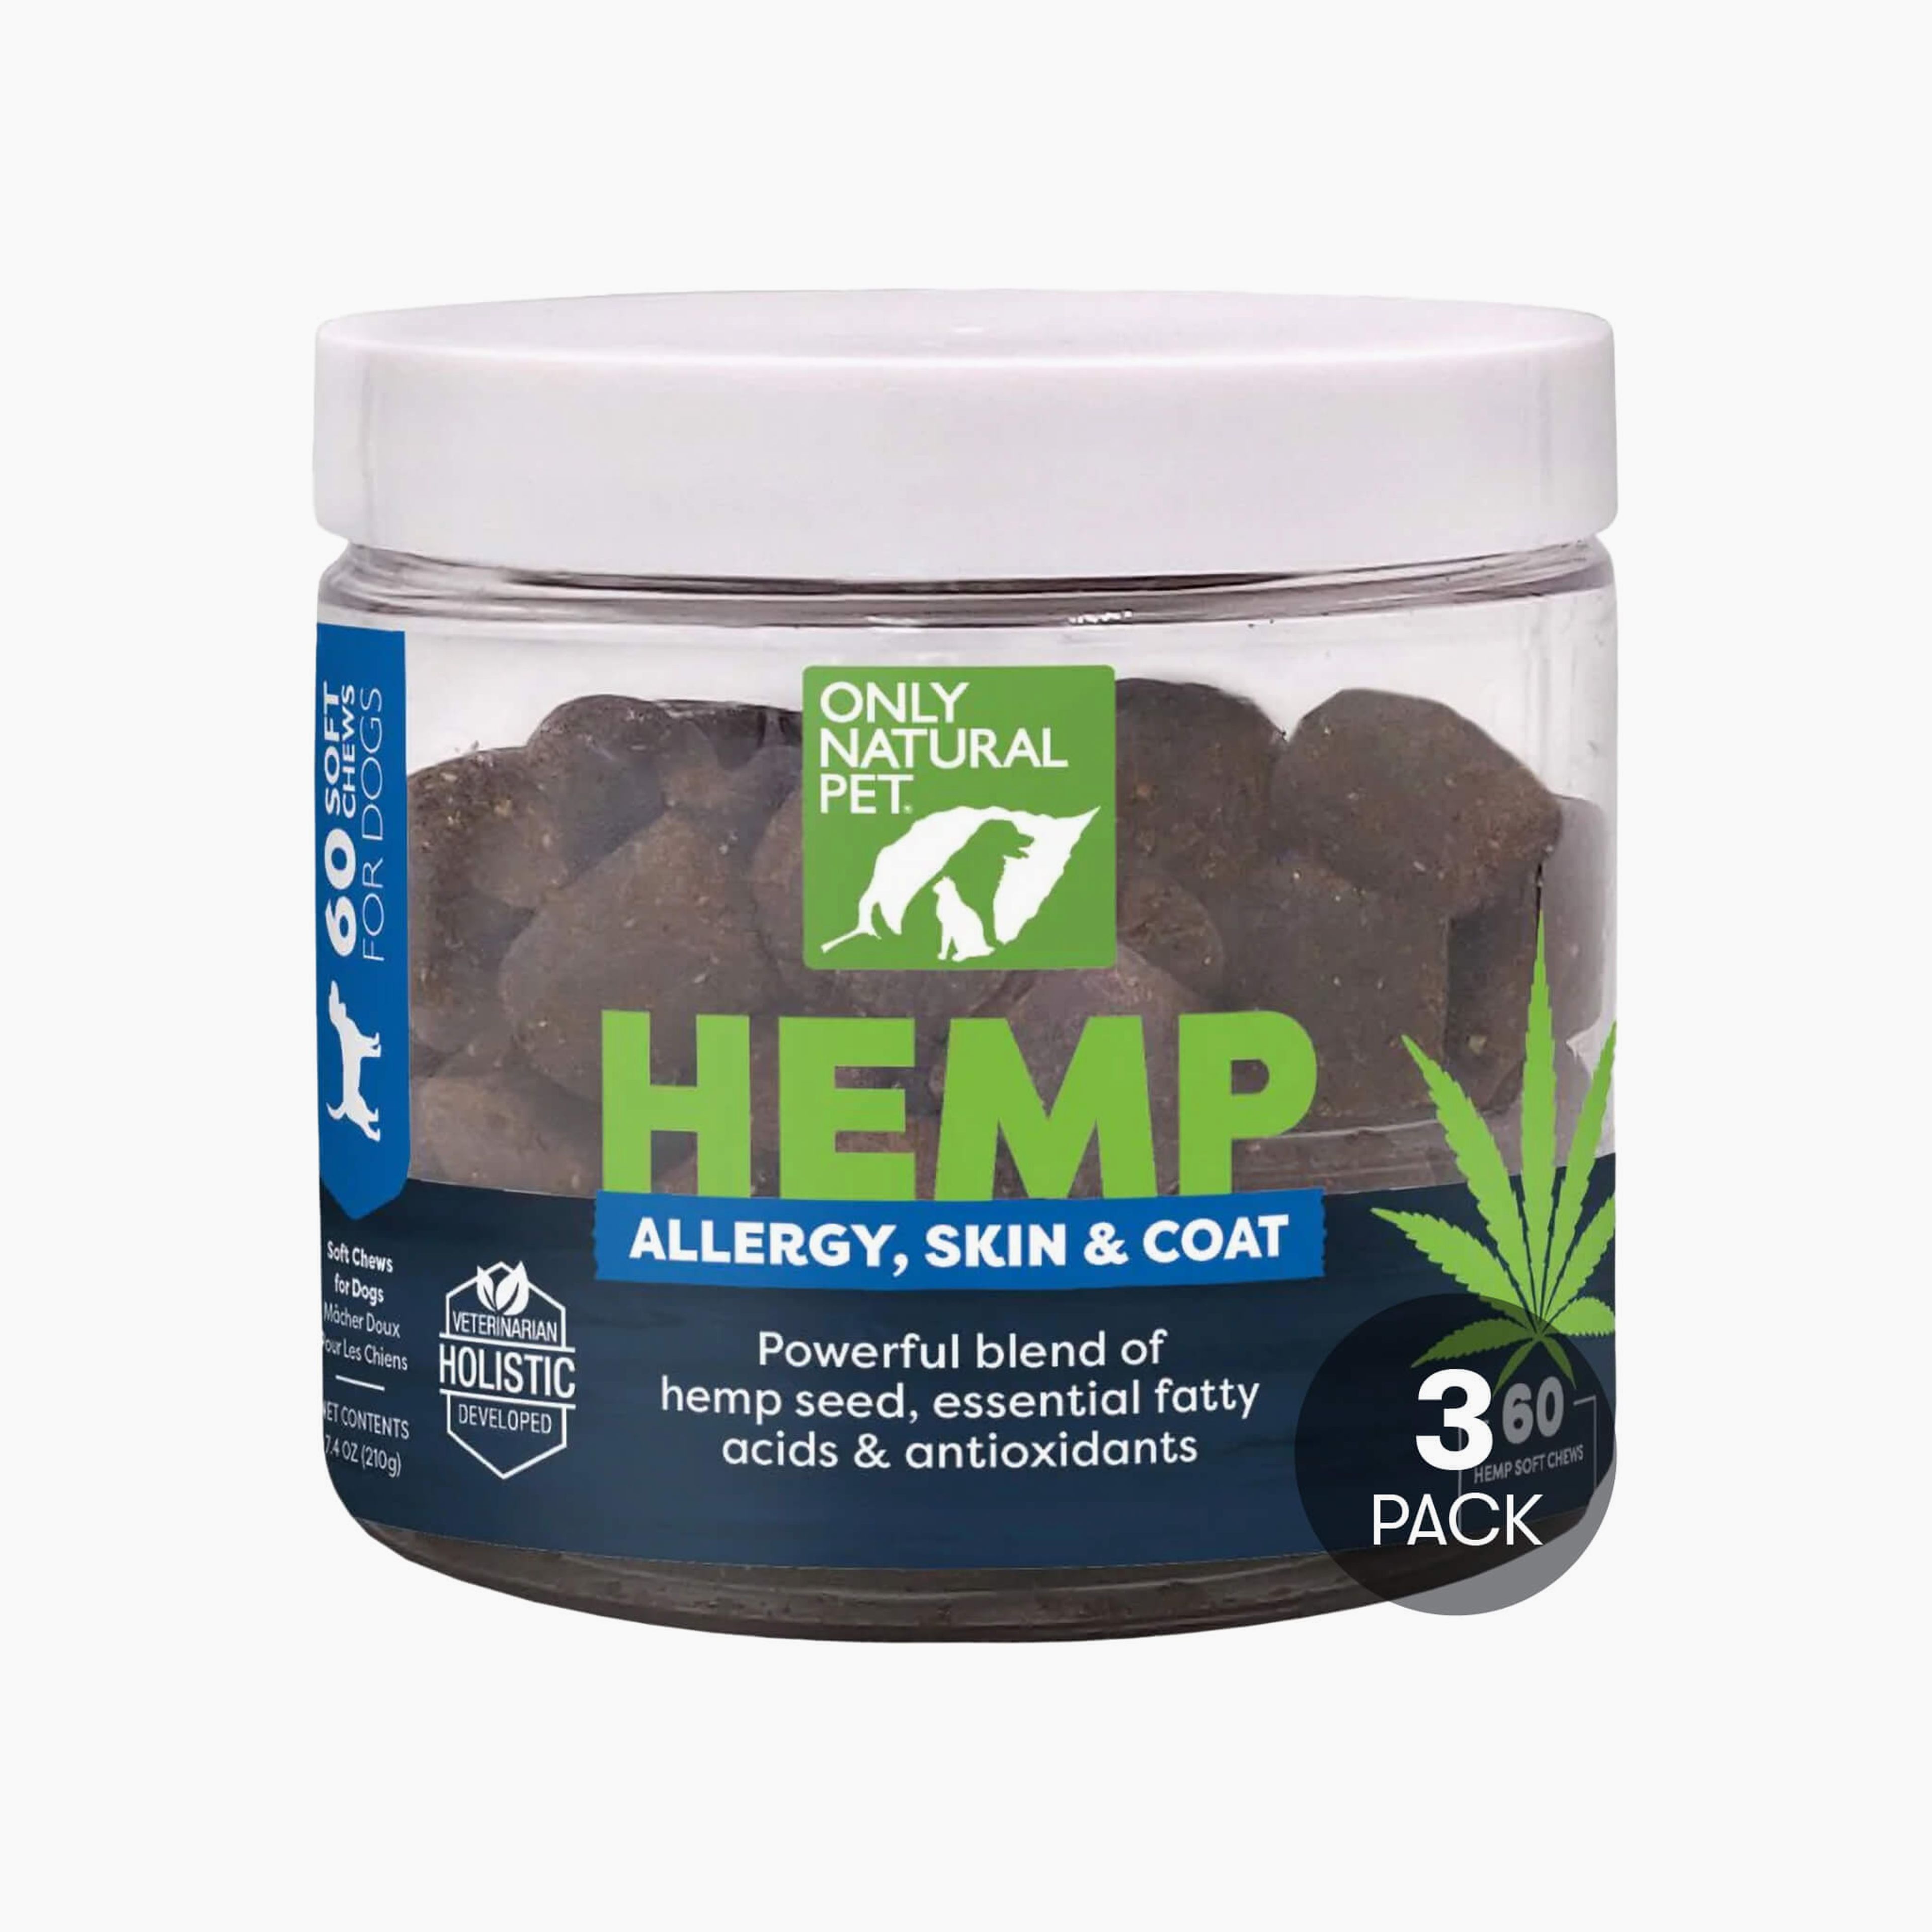 Only Natural Pet Hemp Allergy Skin & Coat Soft Chews for Dogs